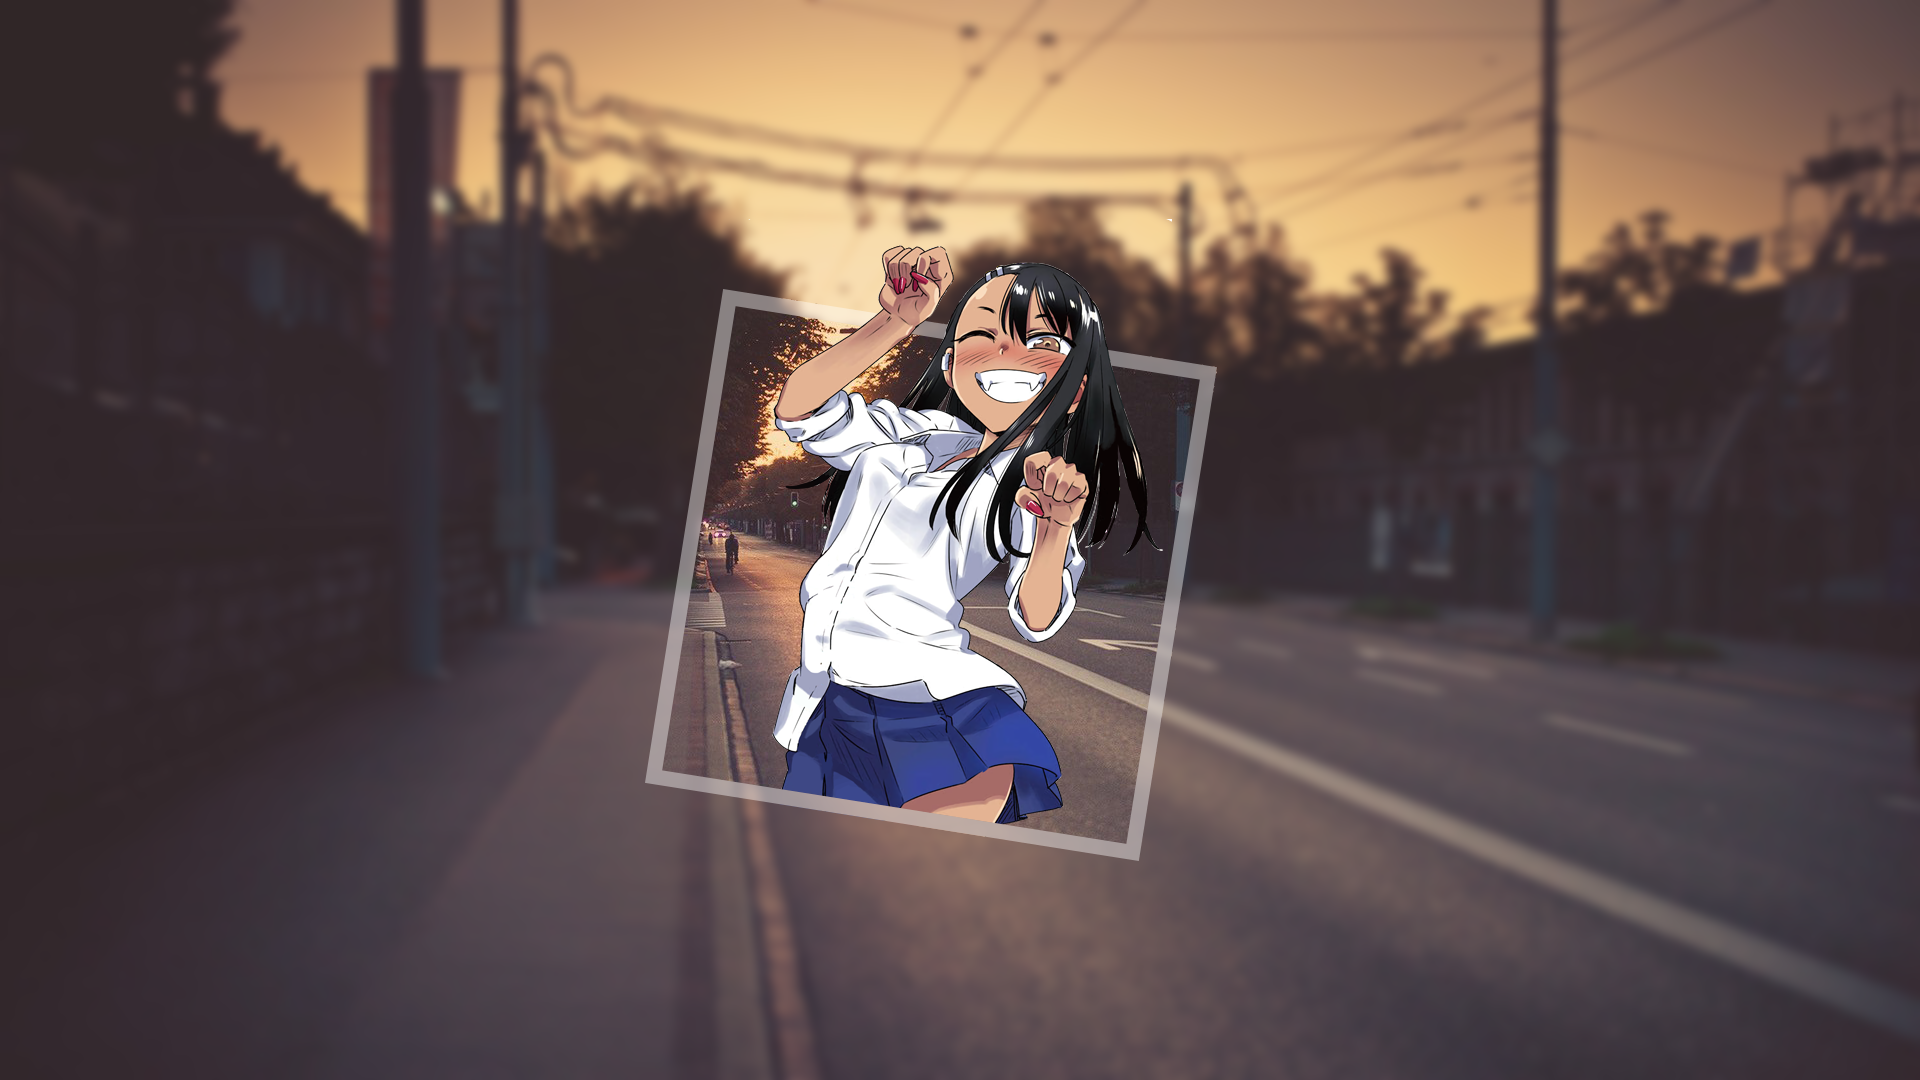 Manga Picture In Picture Piture In Picture Blurred Dusk Cityscape Dark Hair School Uniform 1920x1080